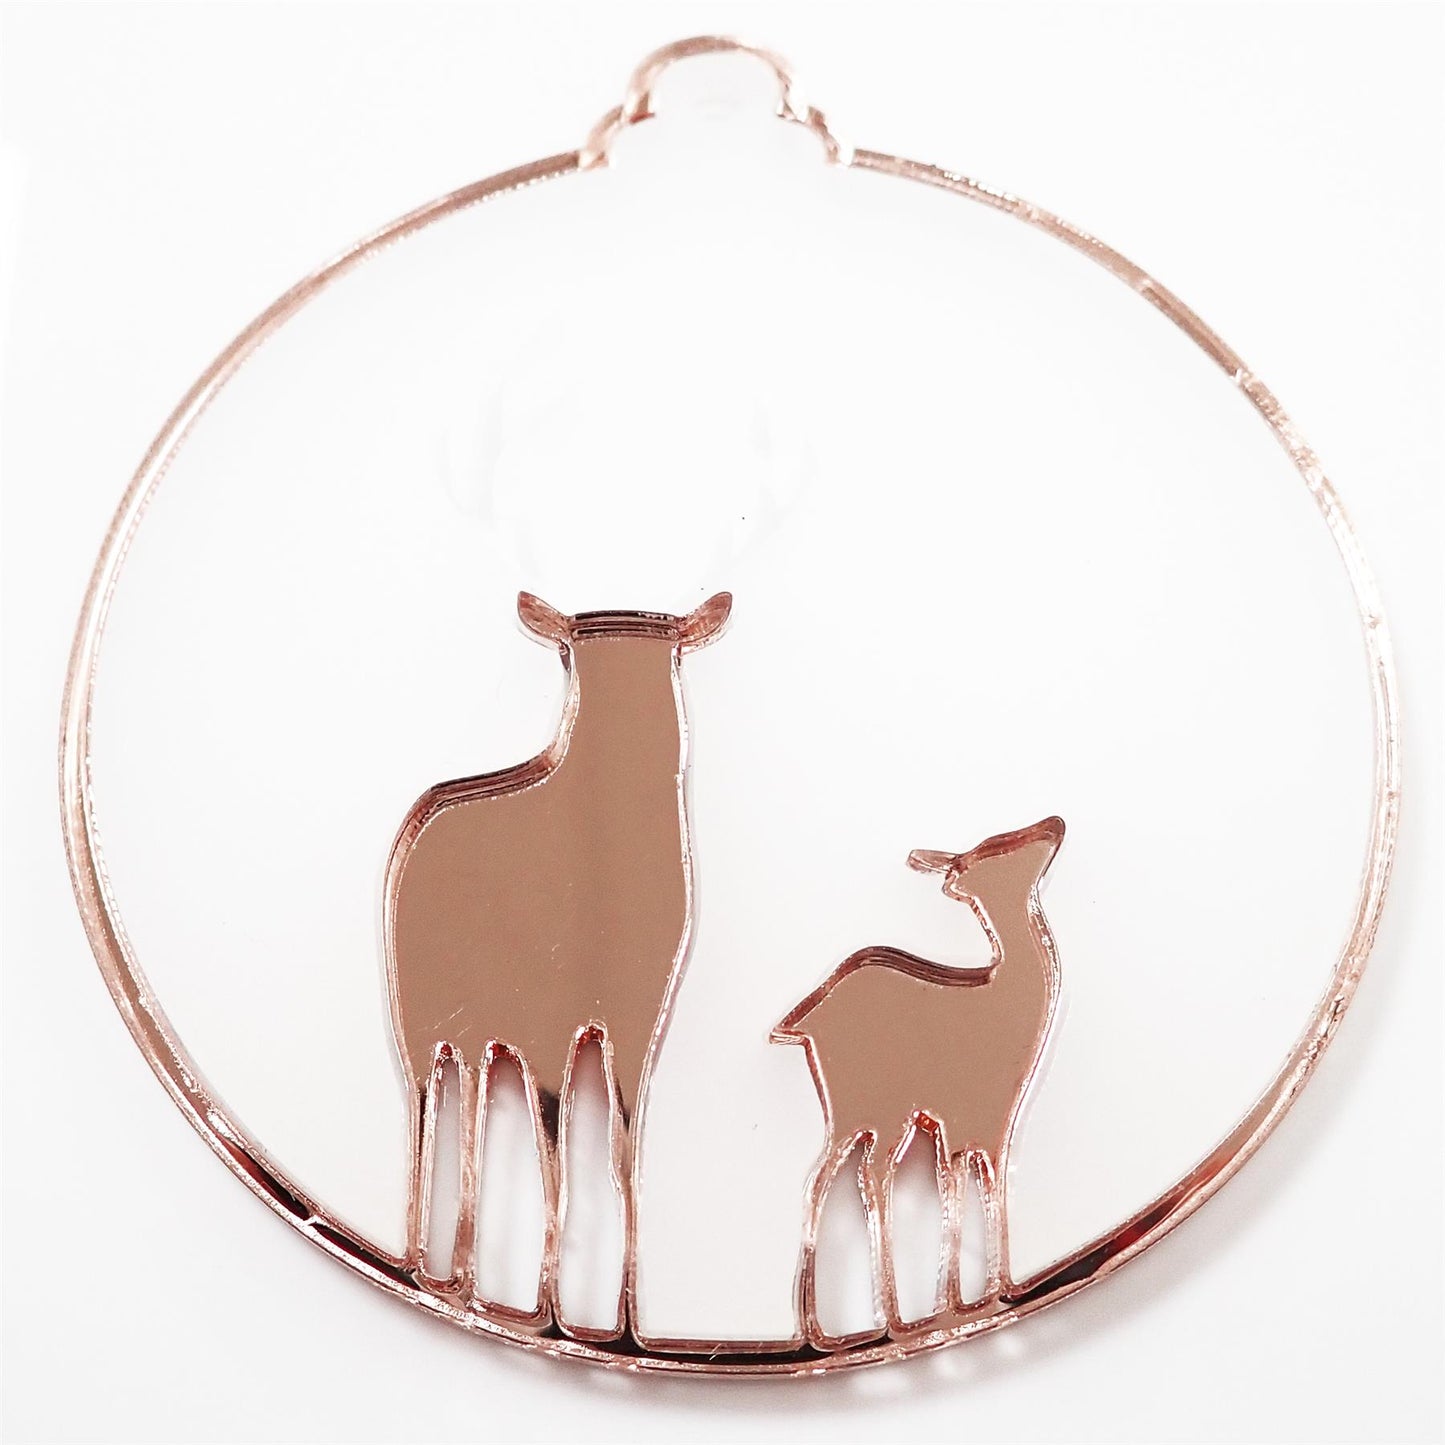 [R&F] White and Pink Deer Christmas Baubles by Incudo, 74mm (Pack of 5)